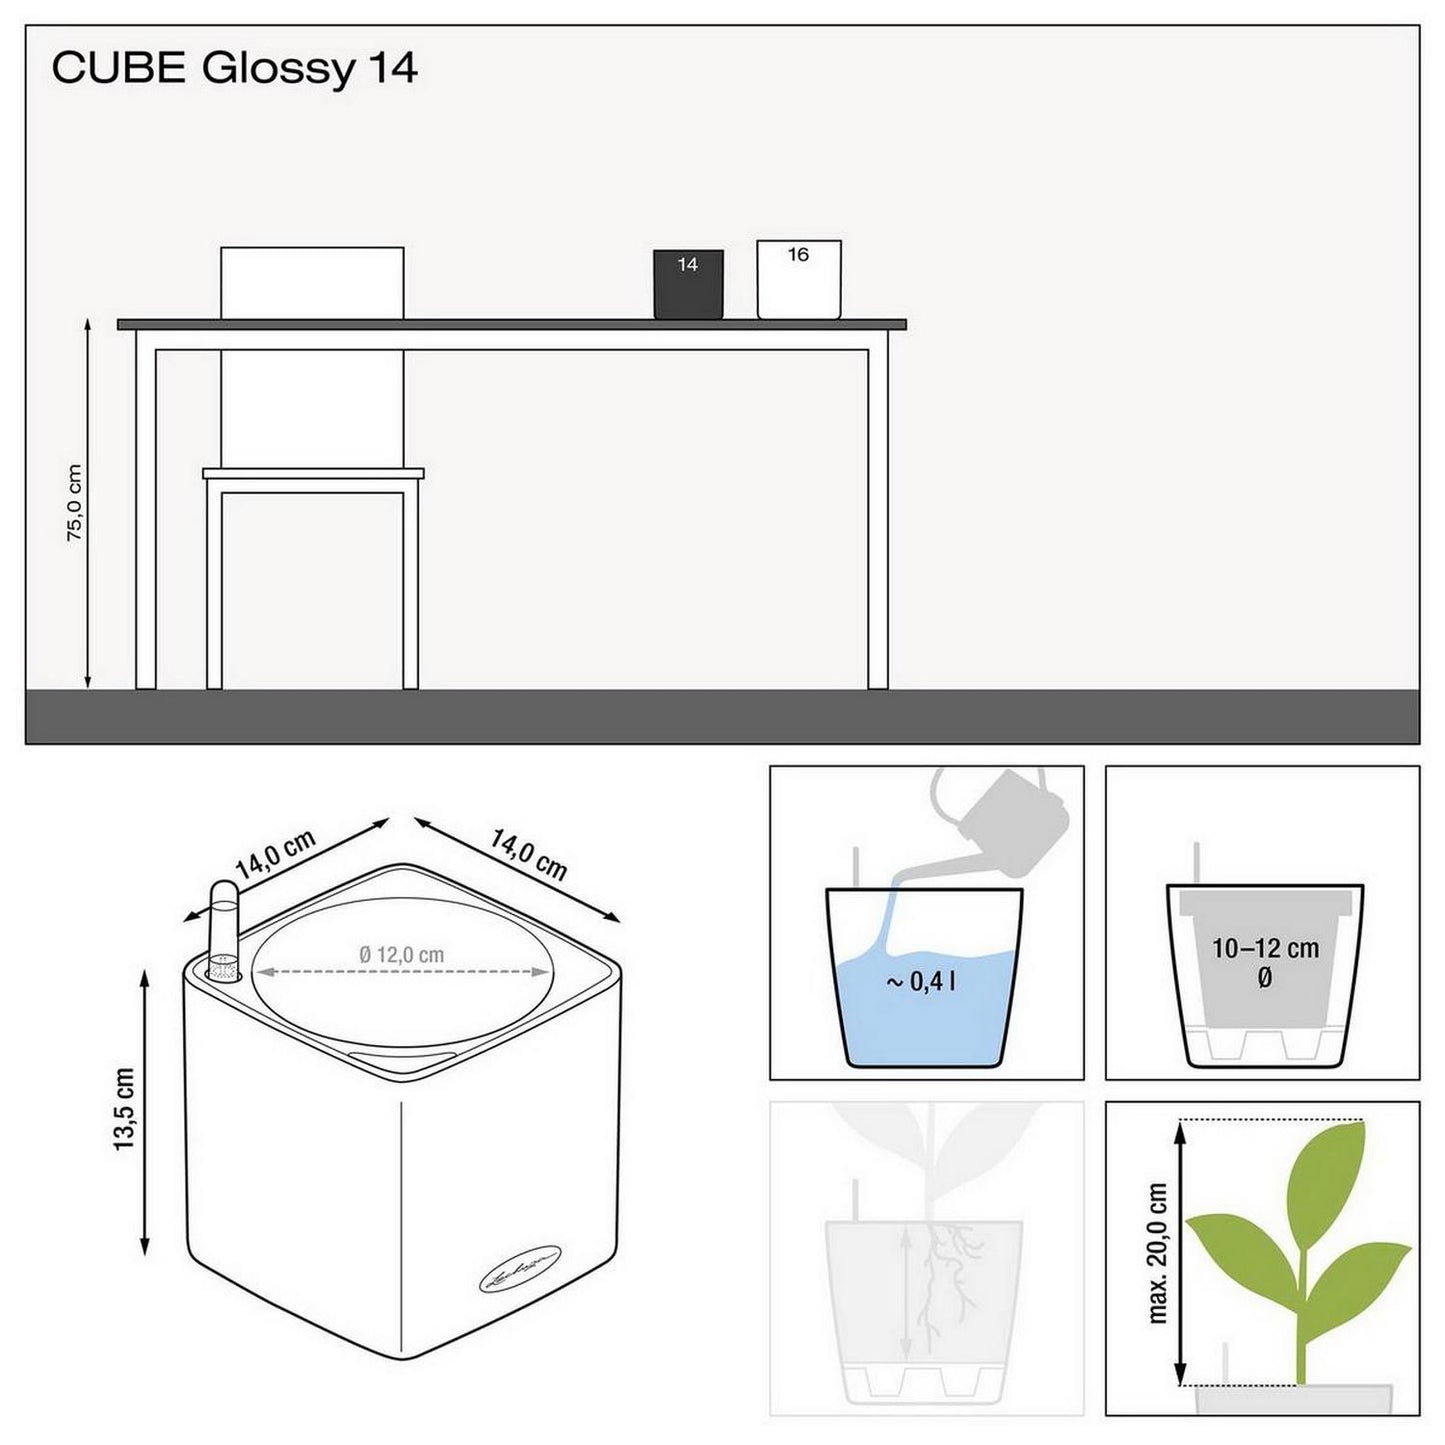 LECHUZA CUBE Glossy Cat 14 Black Highgloss Poly Resin Table Self-watering Planter with Water Level Indicator H14 L14 W14 cm, 1.4L - citiplants.com